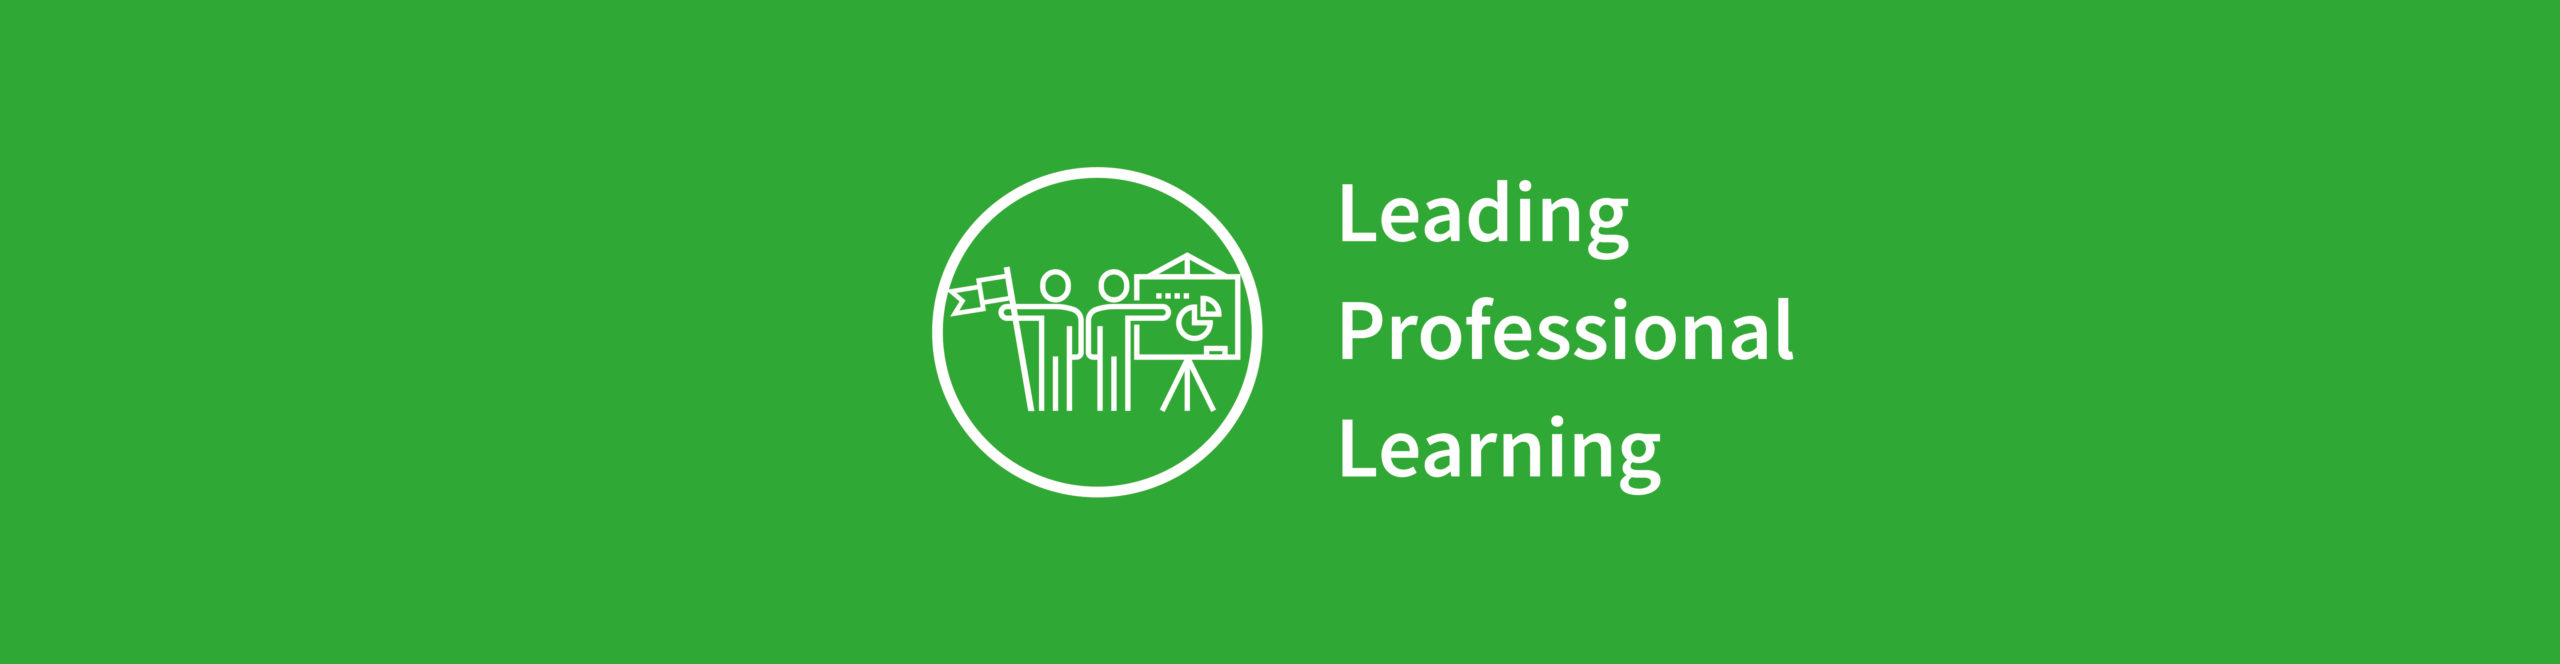 Leading Professional Learning Header